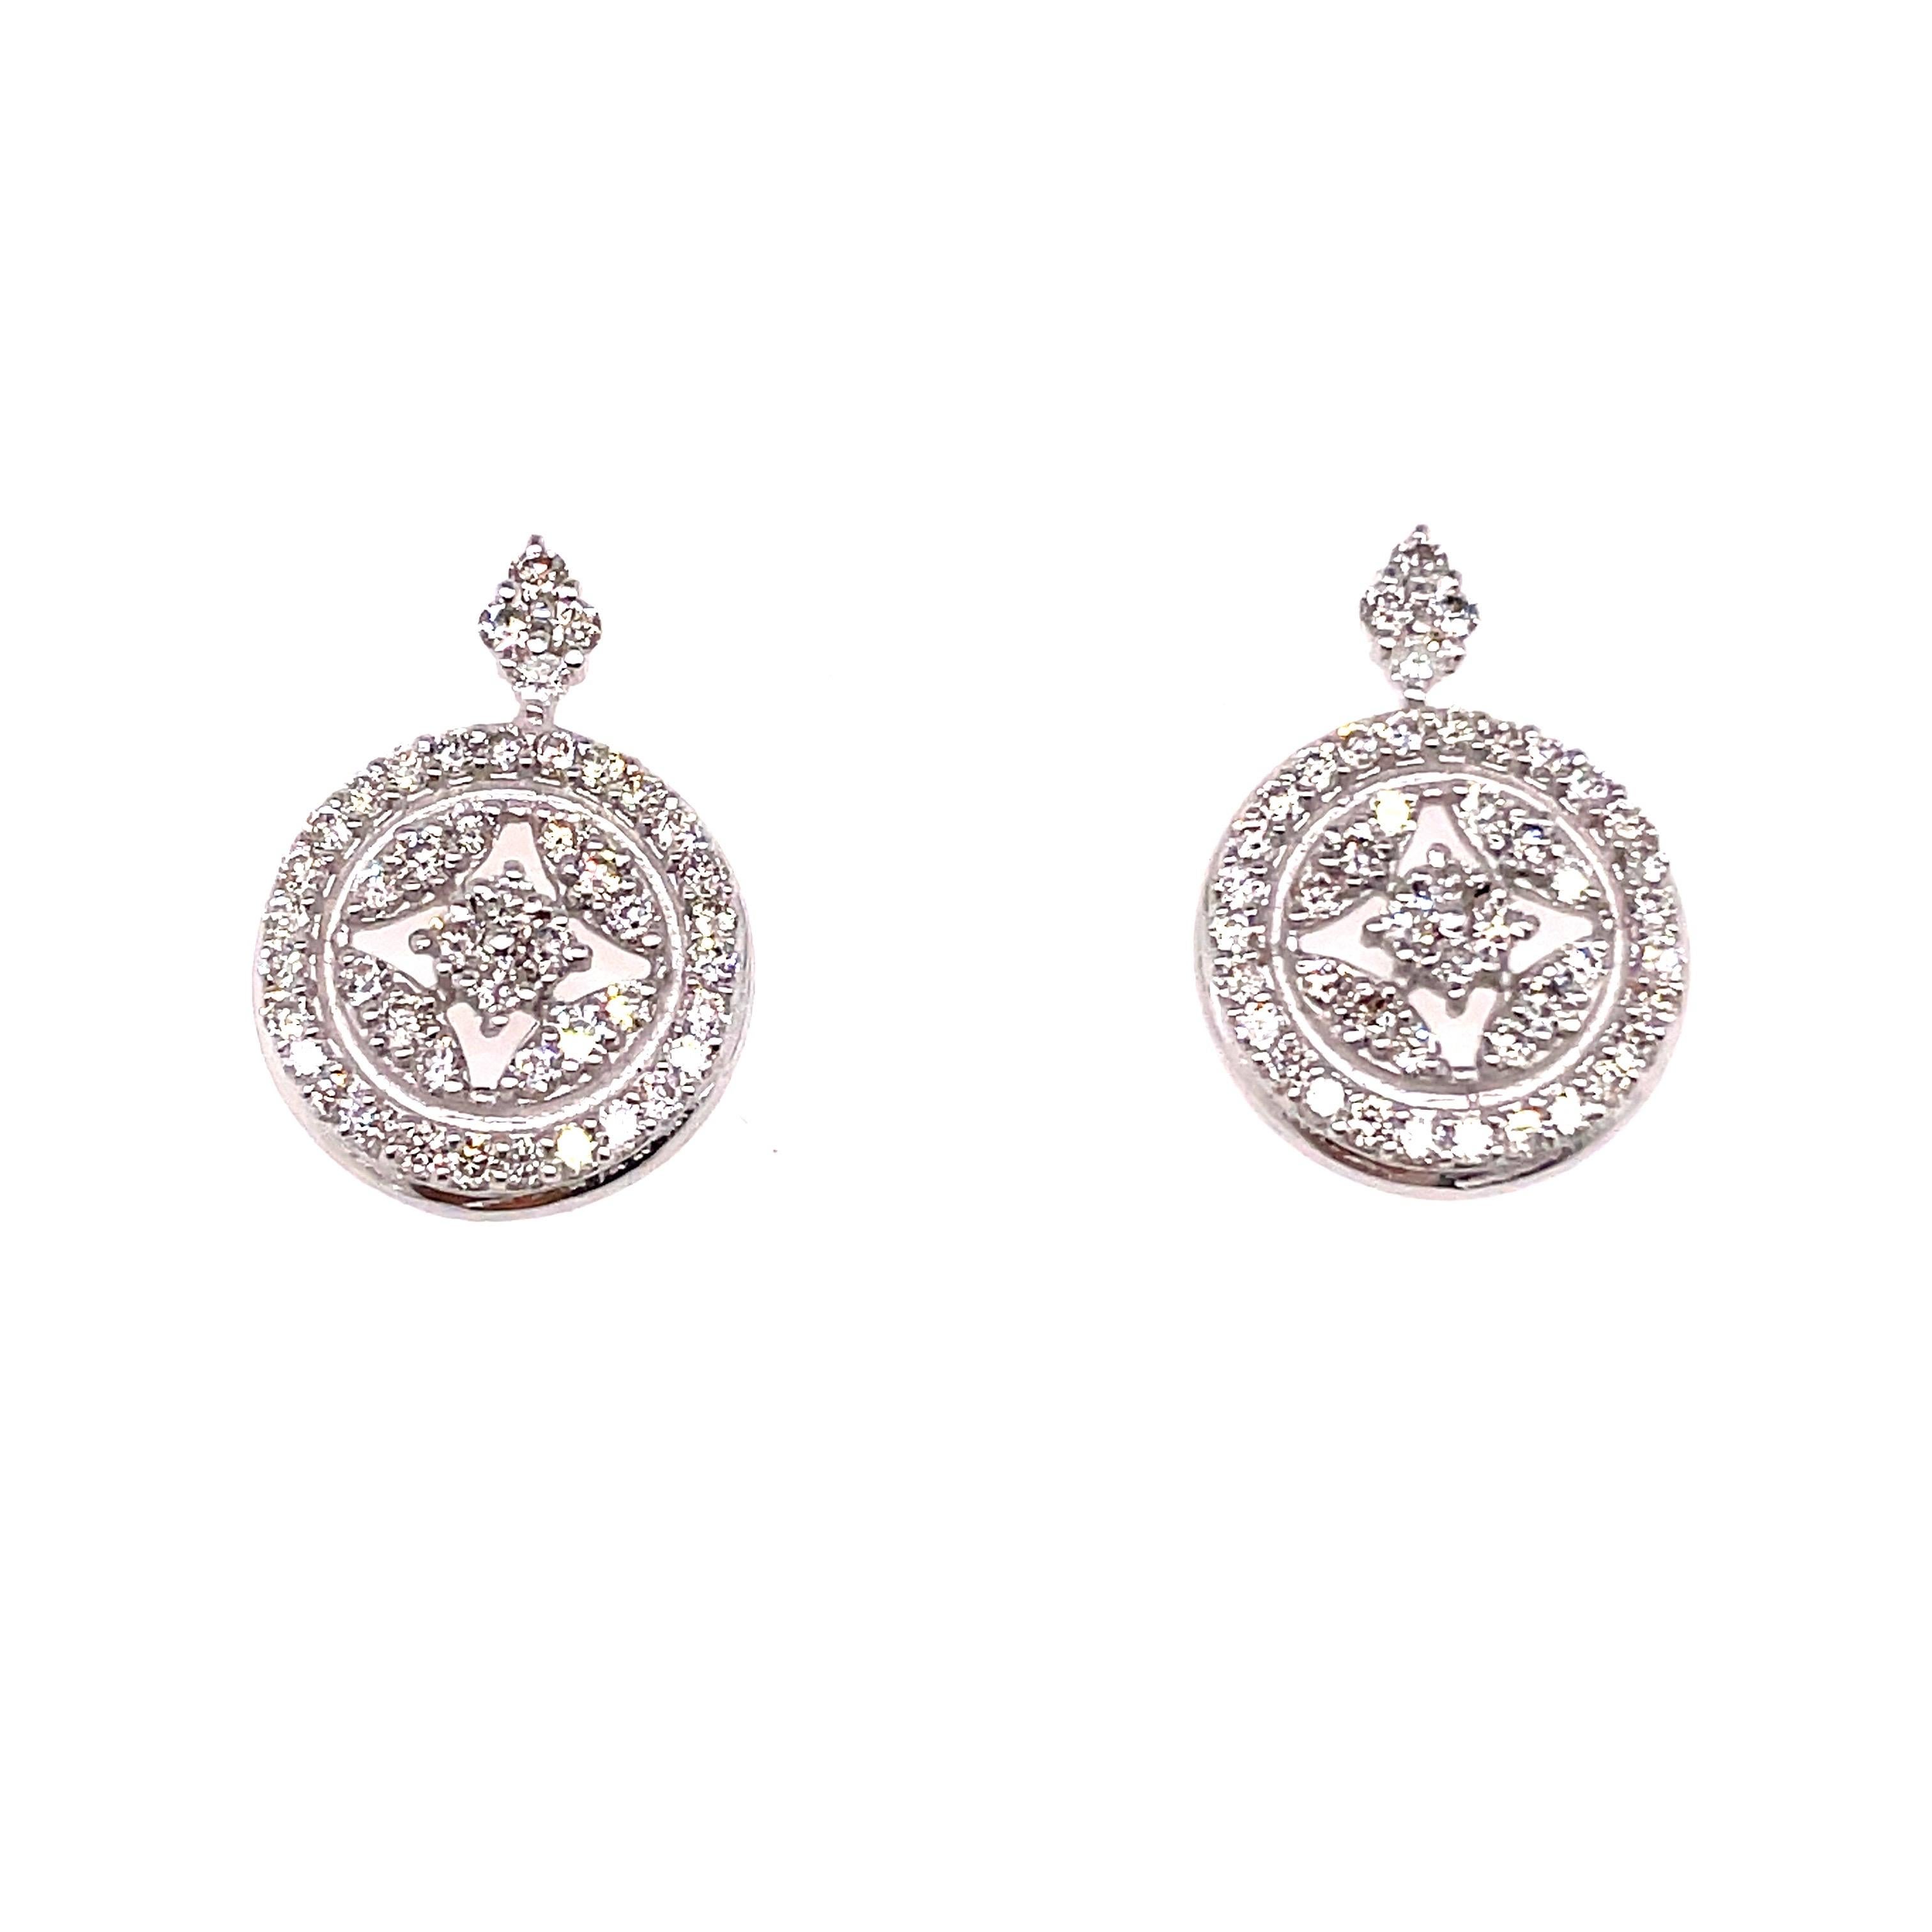 14k White Gold Diamond Round Pave Diamond Earrings, 1.34 Cts

The meticulously crafted diamond-shaped design, adorned with a round pave of exquisite diamonds, that envelops it creates a mesmerizing play of brilliance, capturing the essence of